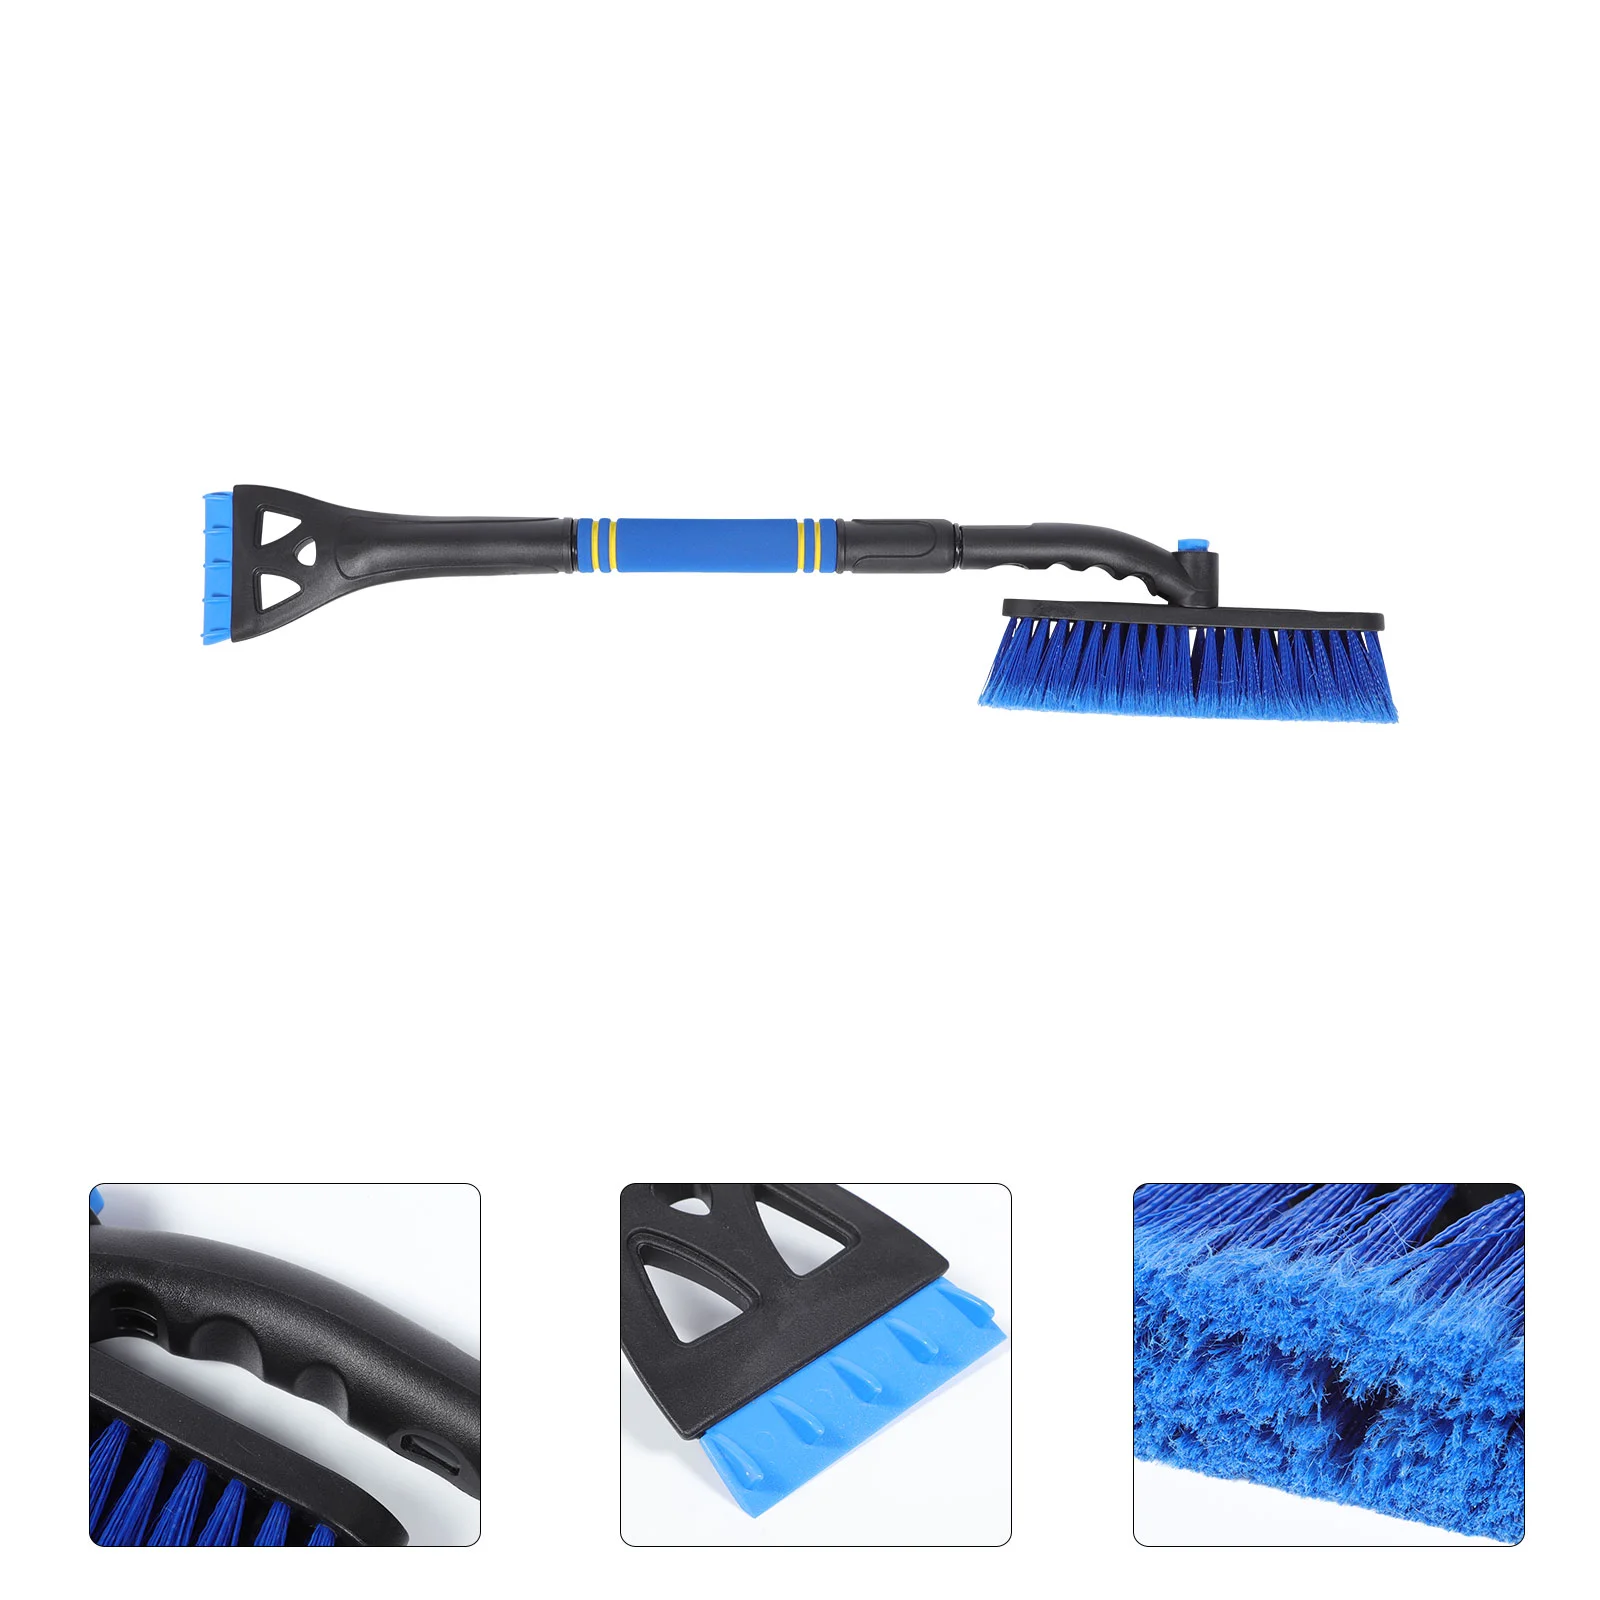 

Squeegee Broom Telescopic Snow 3-in-1 Ice Multifunction Deicing Cleaning Tool Deicer Car Retractable Shovels